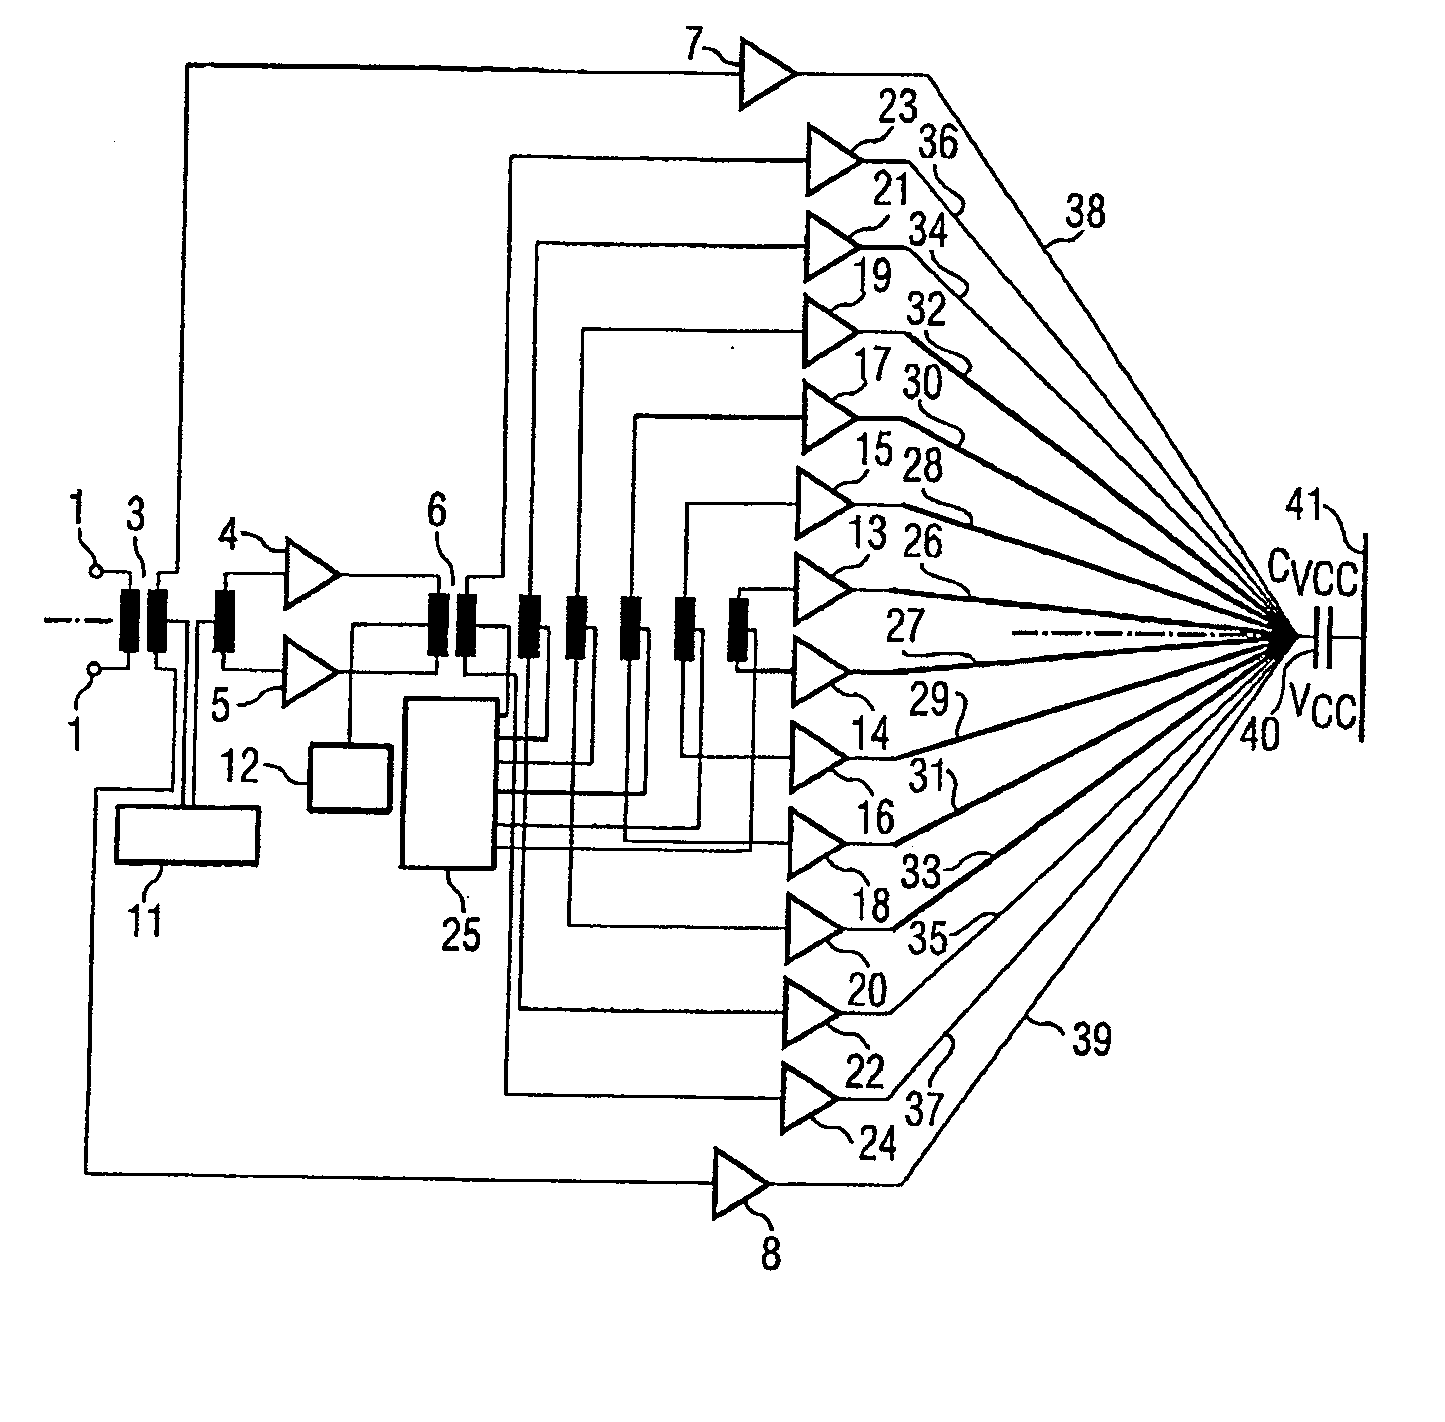 Power amplifier arrangement having an antenna, and a method for amplification and emission of a signal